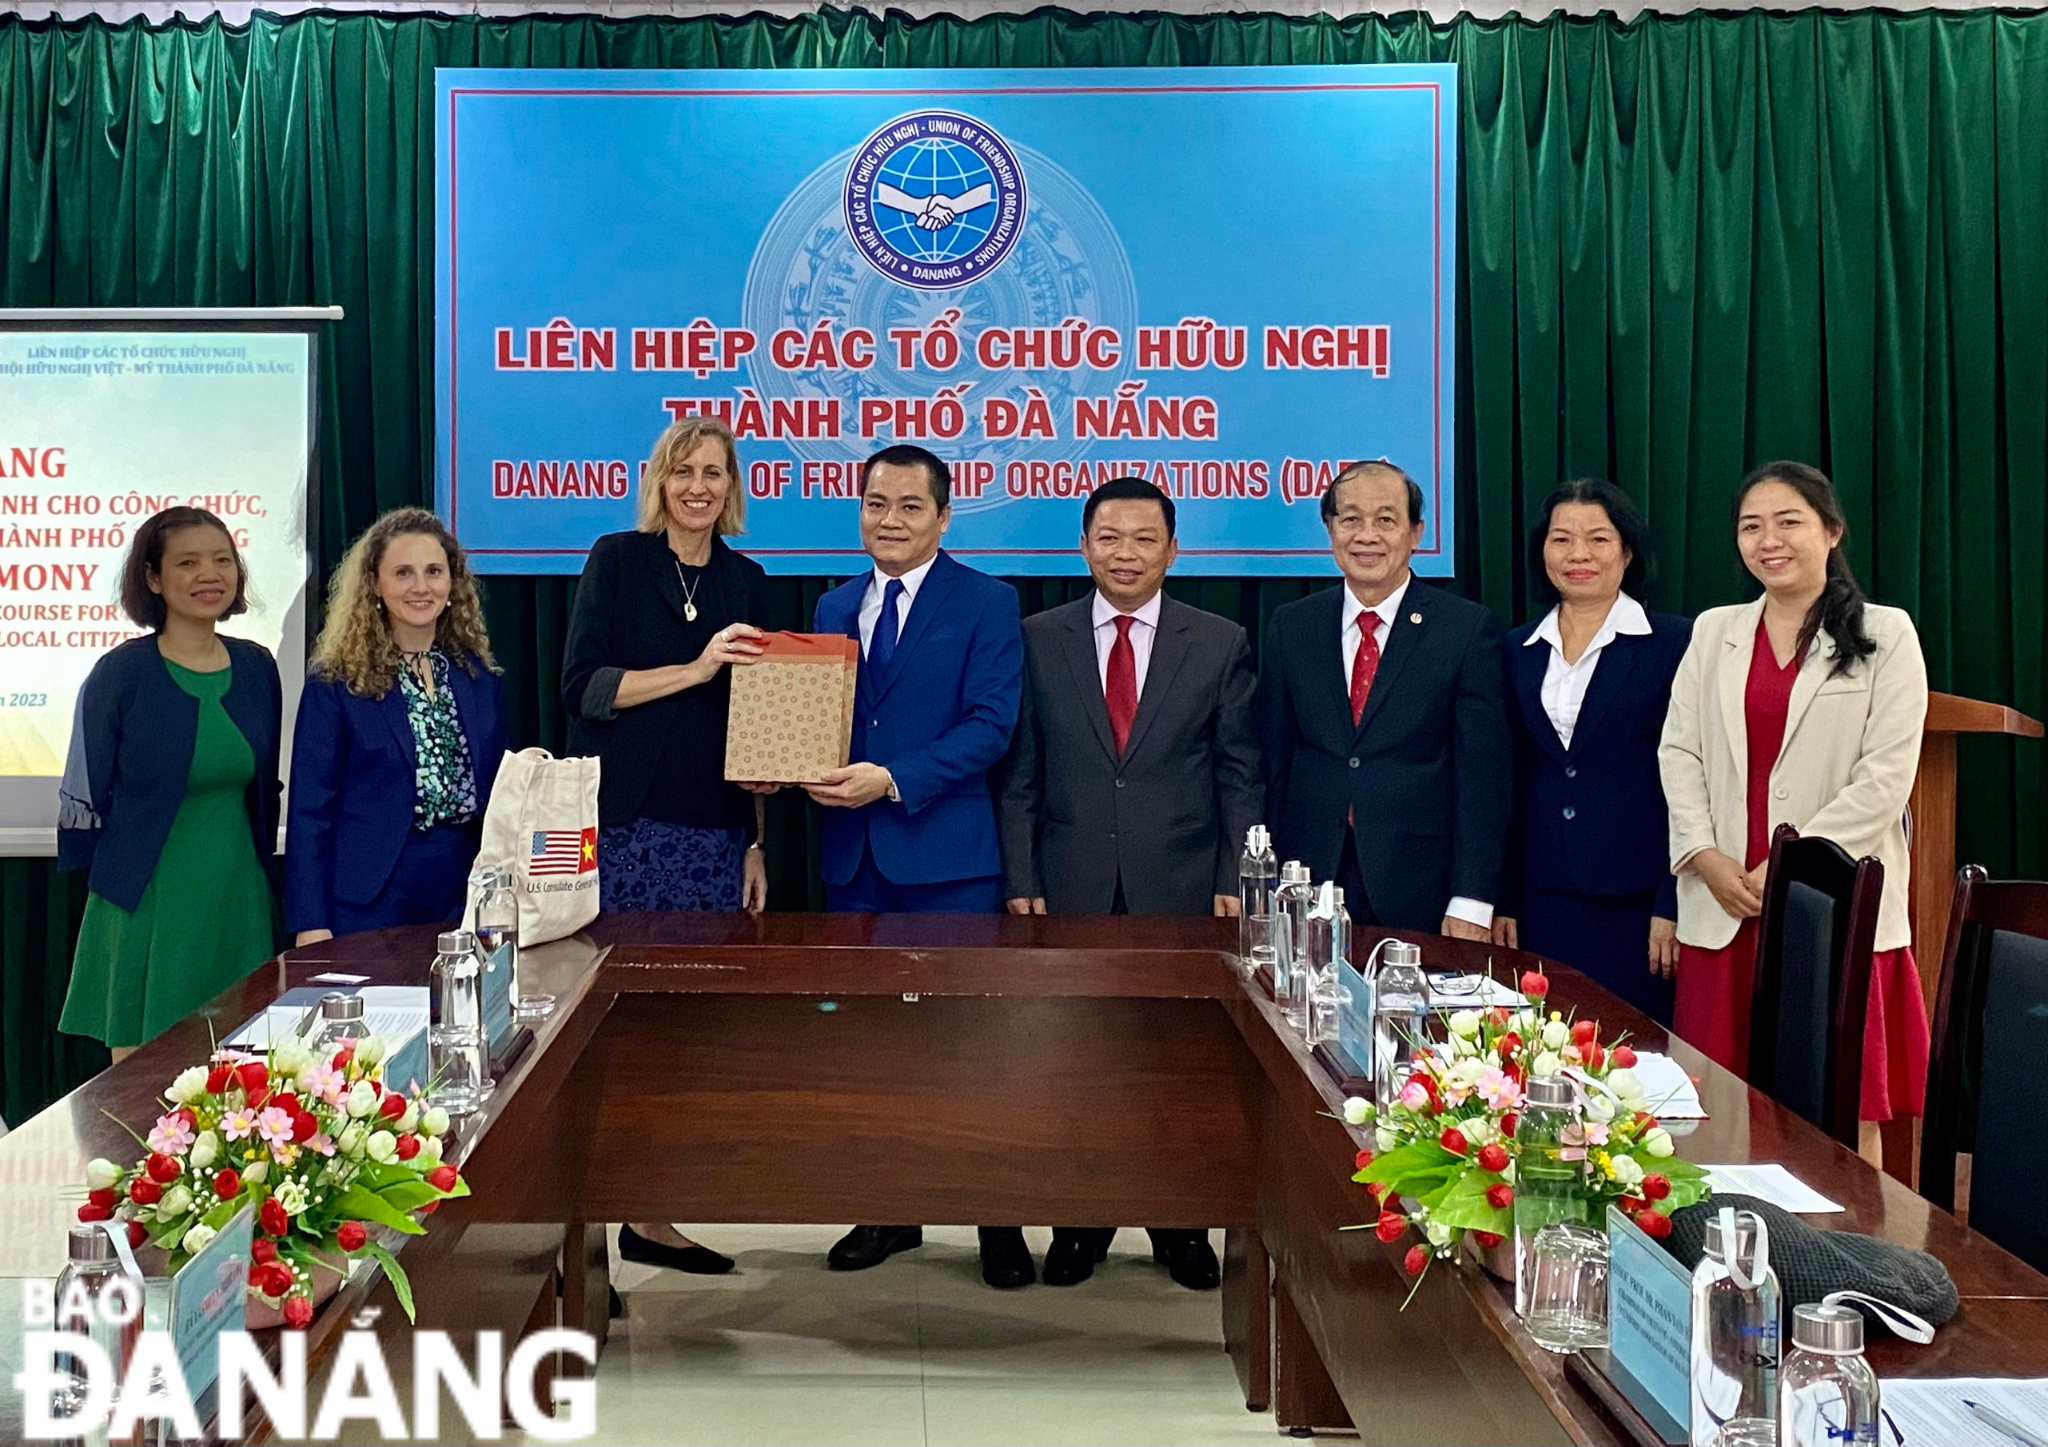 DAFO Chairman Nguyen Ngoc Binh (5th, right) presents a gift to representatives from the US Consul General in Ho Chi Minh City Susan Burns (3rd, left). Photo: T.PHUONG